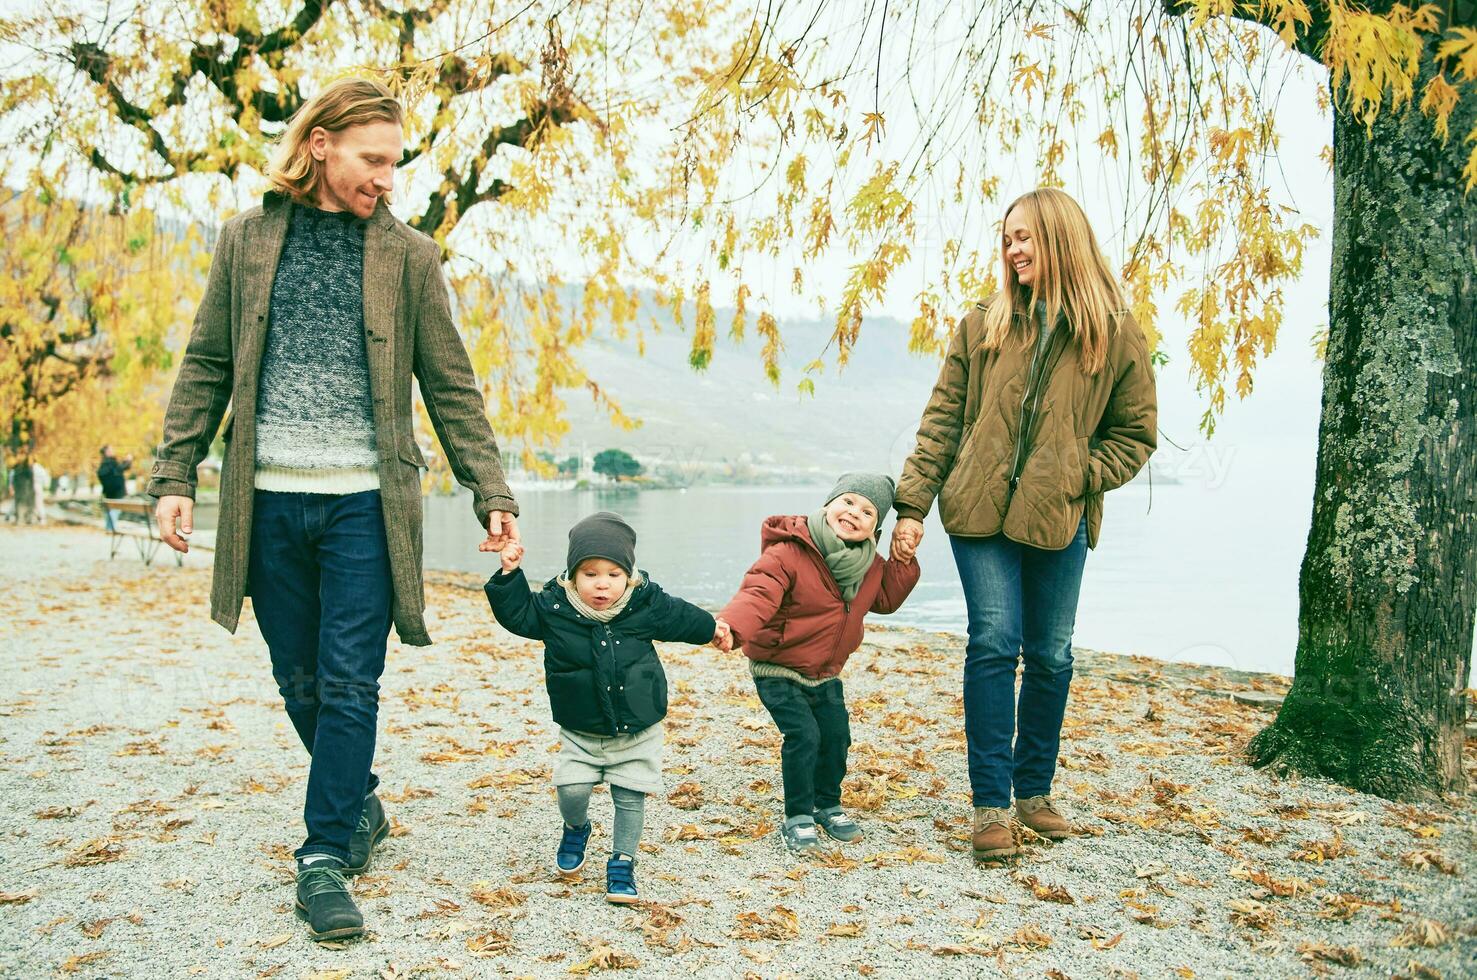 Outdoor portrait of young happy family of four, mother and father playing with children in autumn park by the lake, cold weather photo